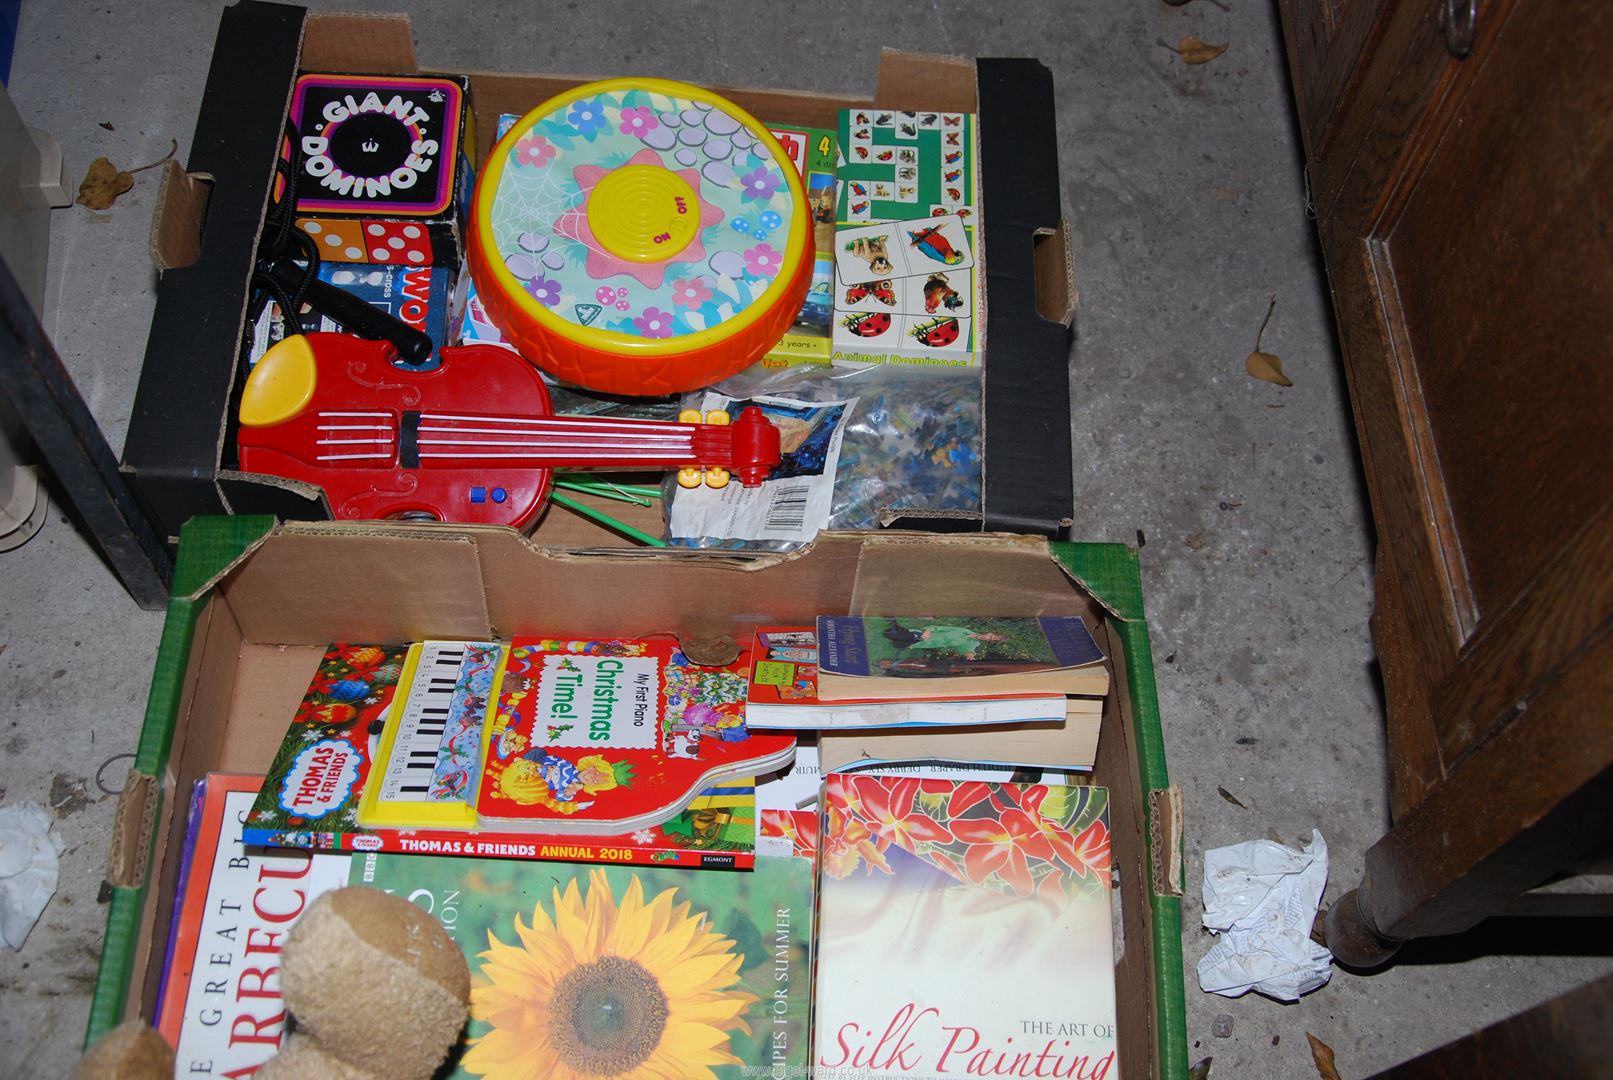 Two boxes of books, box of children's toys and a box of handbags. - Image 2 of 3